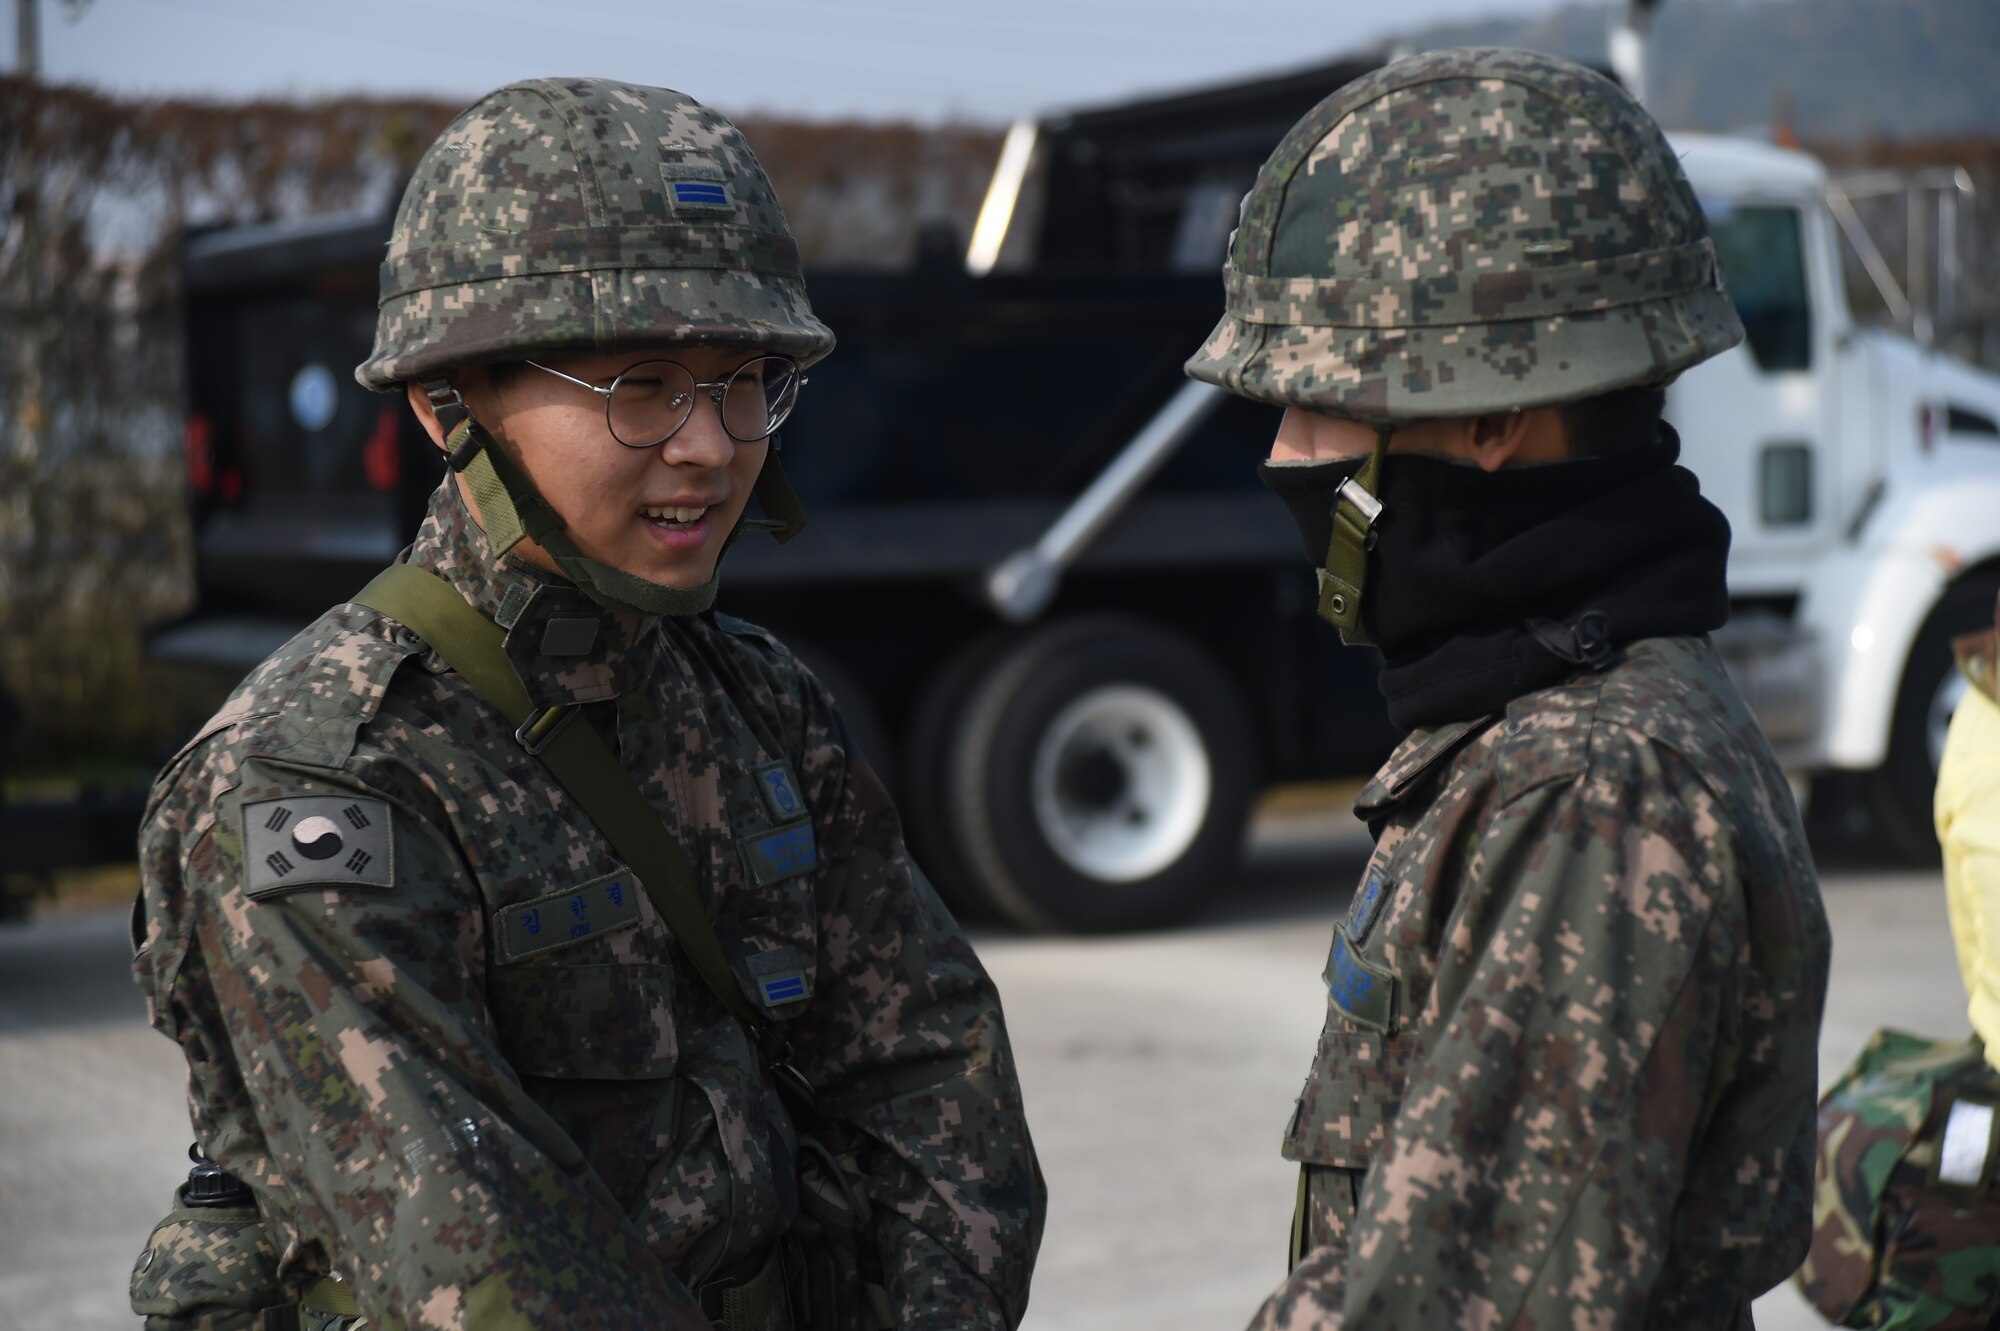 Republic of Korea Air Force Airmen participate in a Rapid Airfield Damage Repair bilateral training exercise at Gwangju Air Base, R.O.K., Nov. 8, 2017. U.S. and R.O.K. Airmen trained together for a week to learn the new RADR process, preparing them for response to wartime contingencies, enhancing interoperability and building partnership capacity in the Indo-Asia Pacific region. The new process makes use of rapid-setting concrete which enables vehicles to pass over it after one hour, and after two hours of cure time, it can support any and all aircraft. (U.S. Air Force photo by Senior Airman Curt Beach)